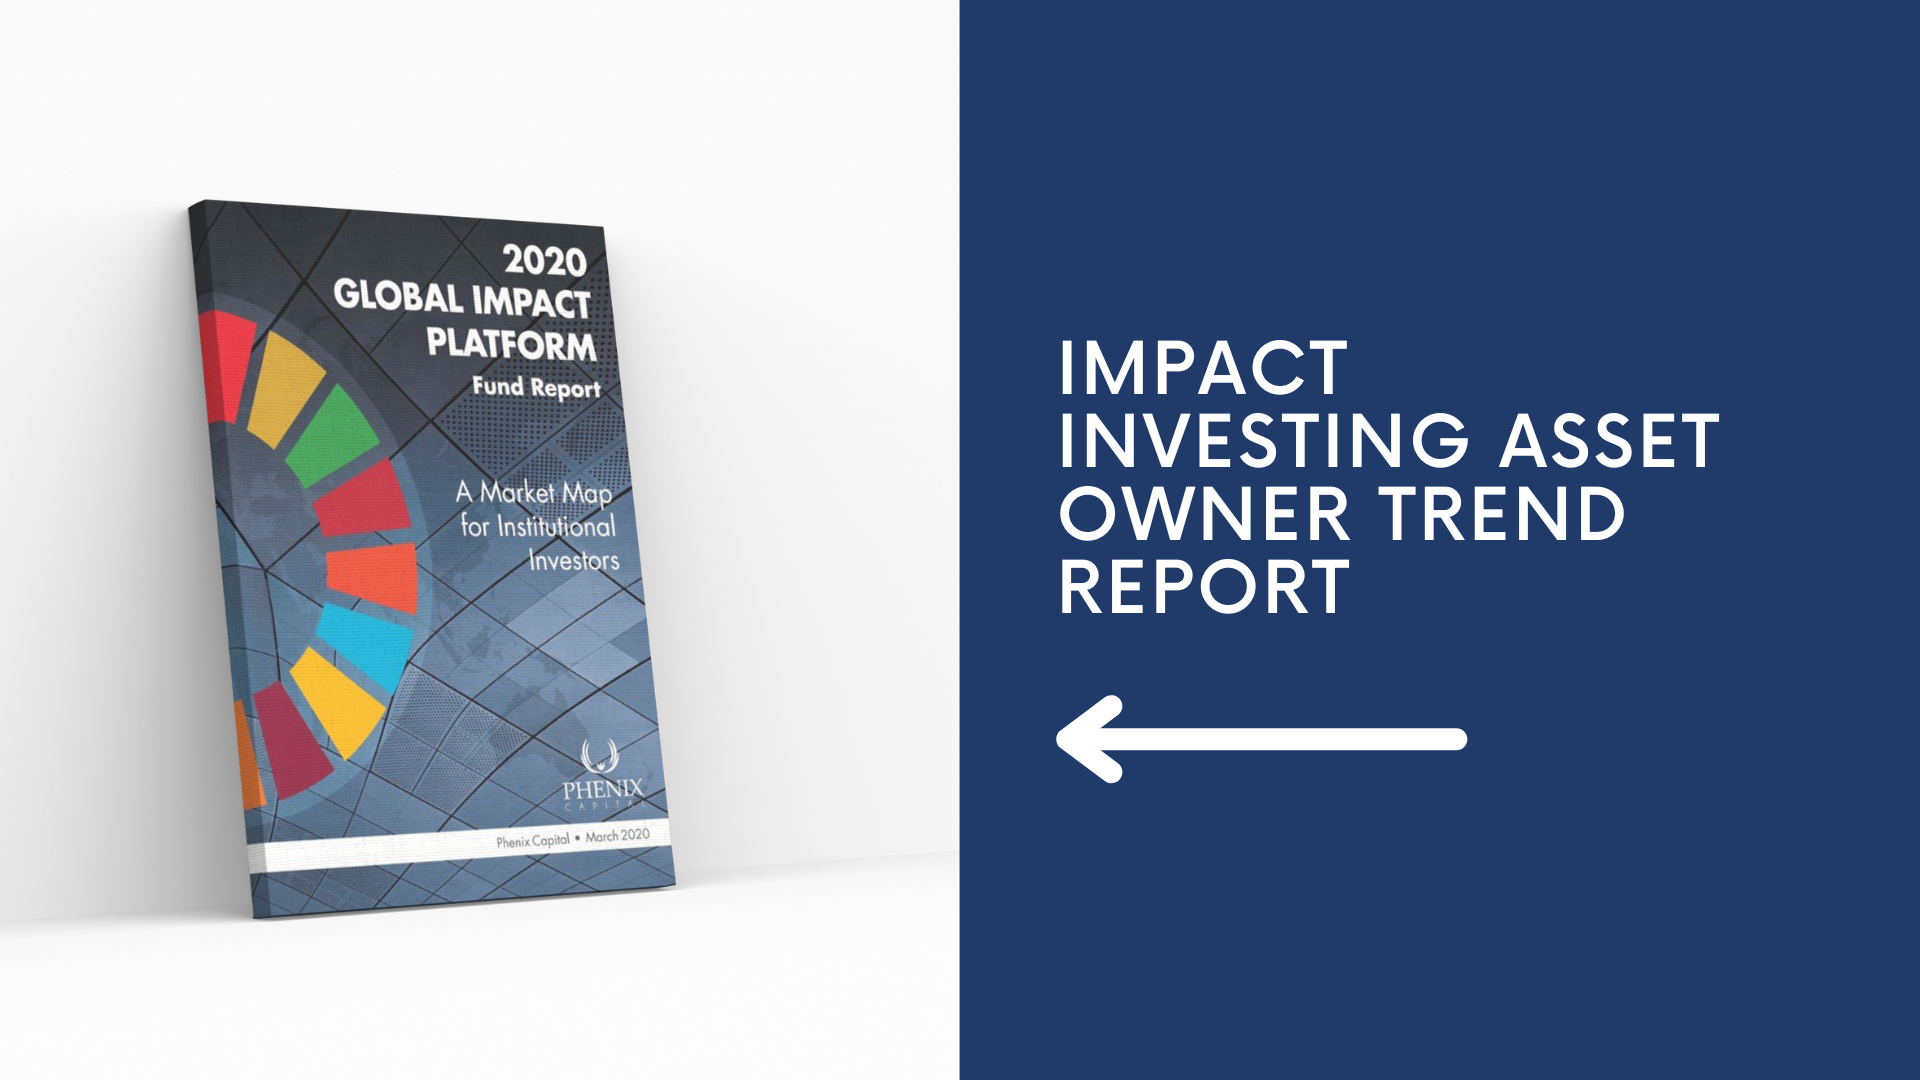 PRESS RELEASE: Phenix Capital releases 1st Impact Investing Asset Owner Trend Report